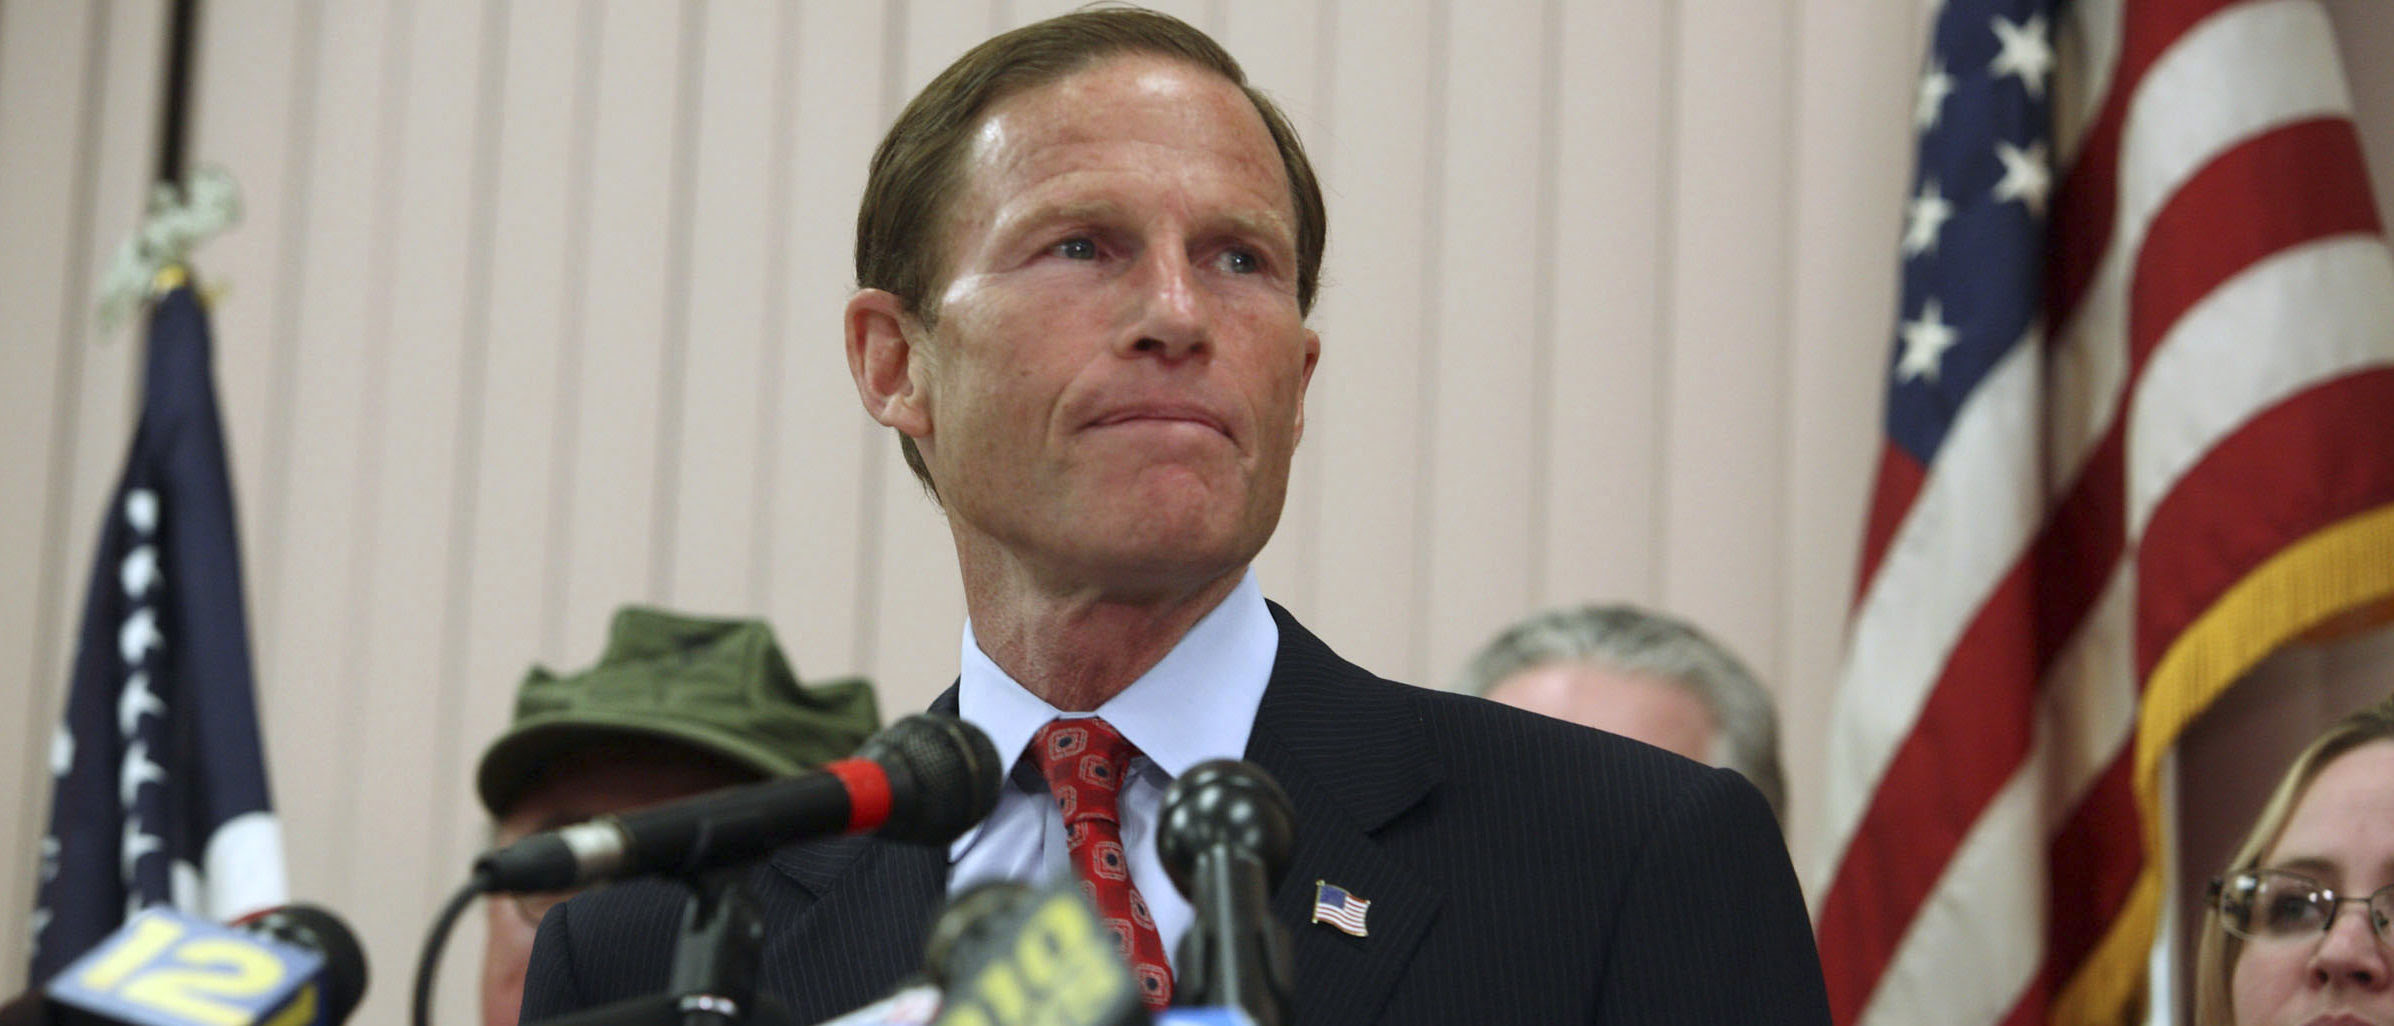 Sen. Blumenthal’s Family Splurged On Intel Stock Before He Voted For A Massive Subsidy Bill